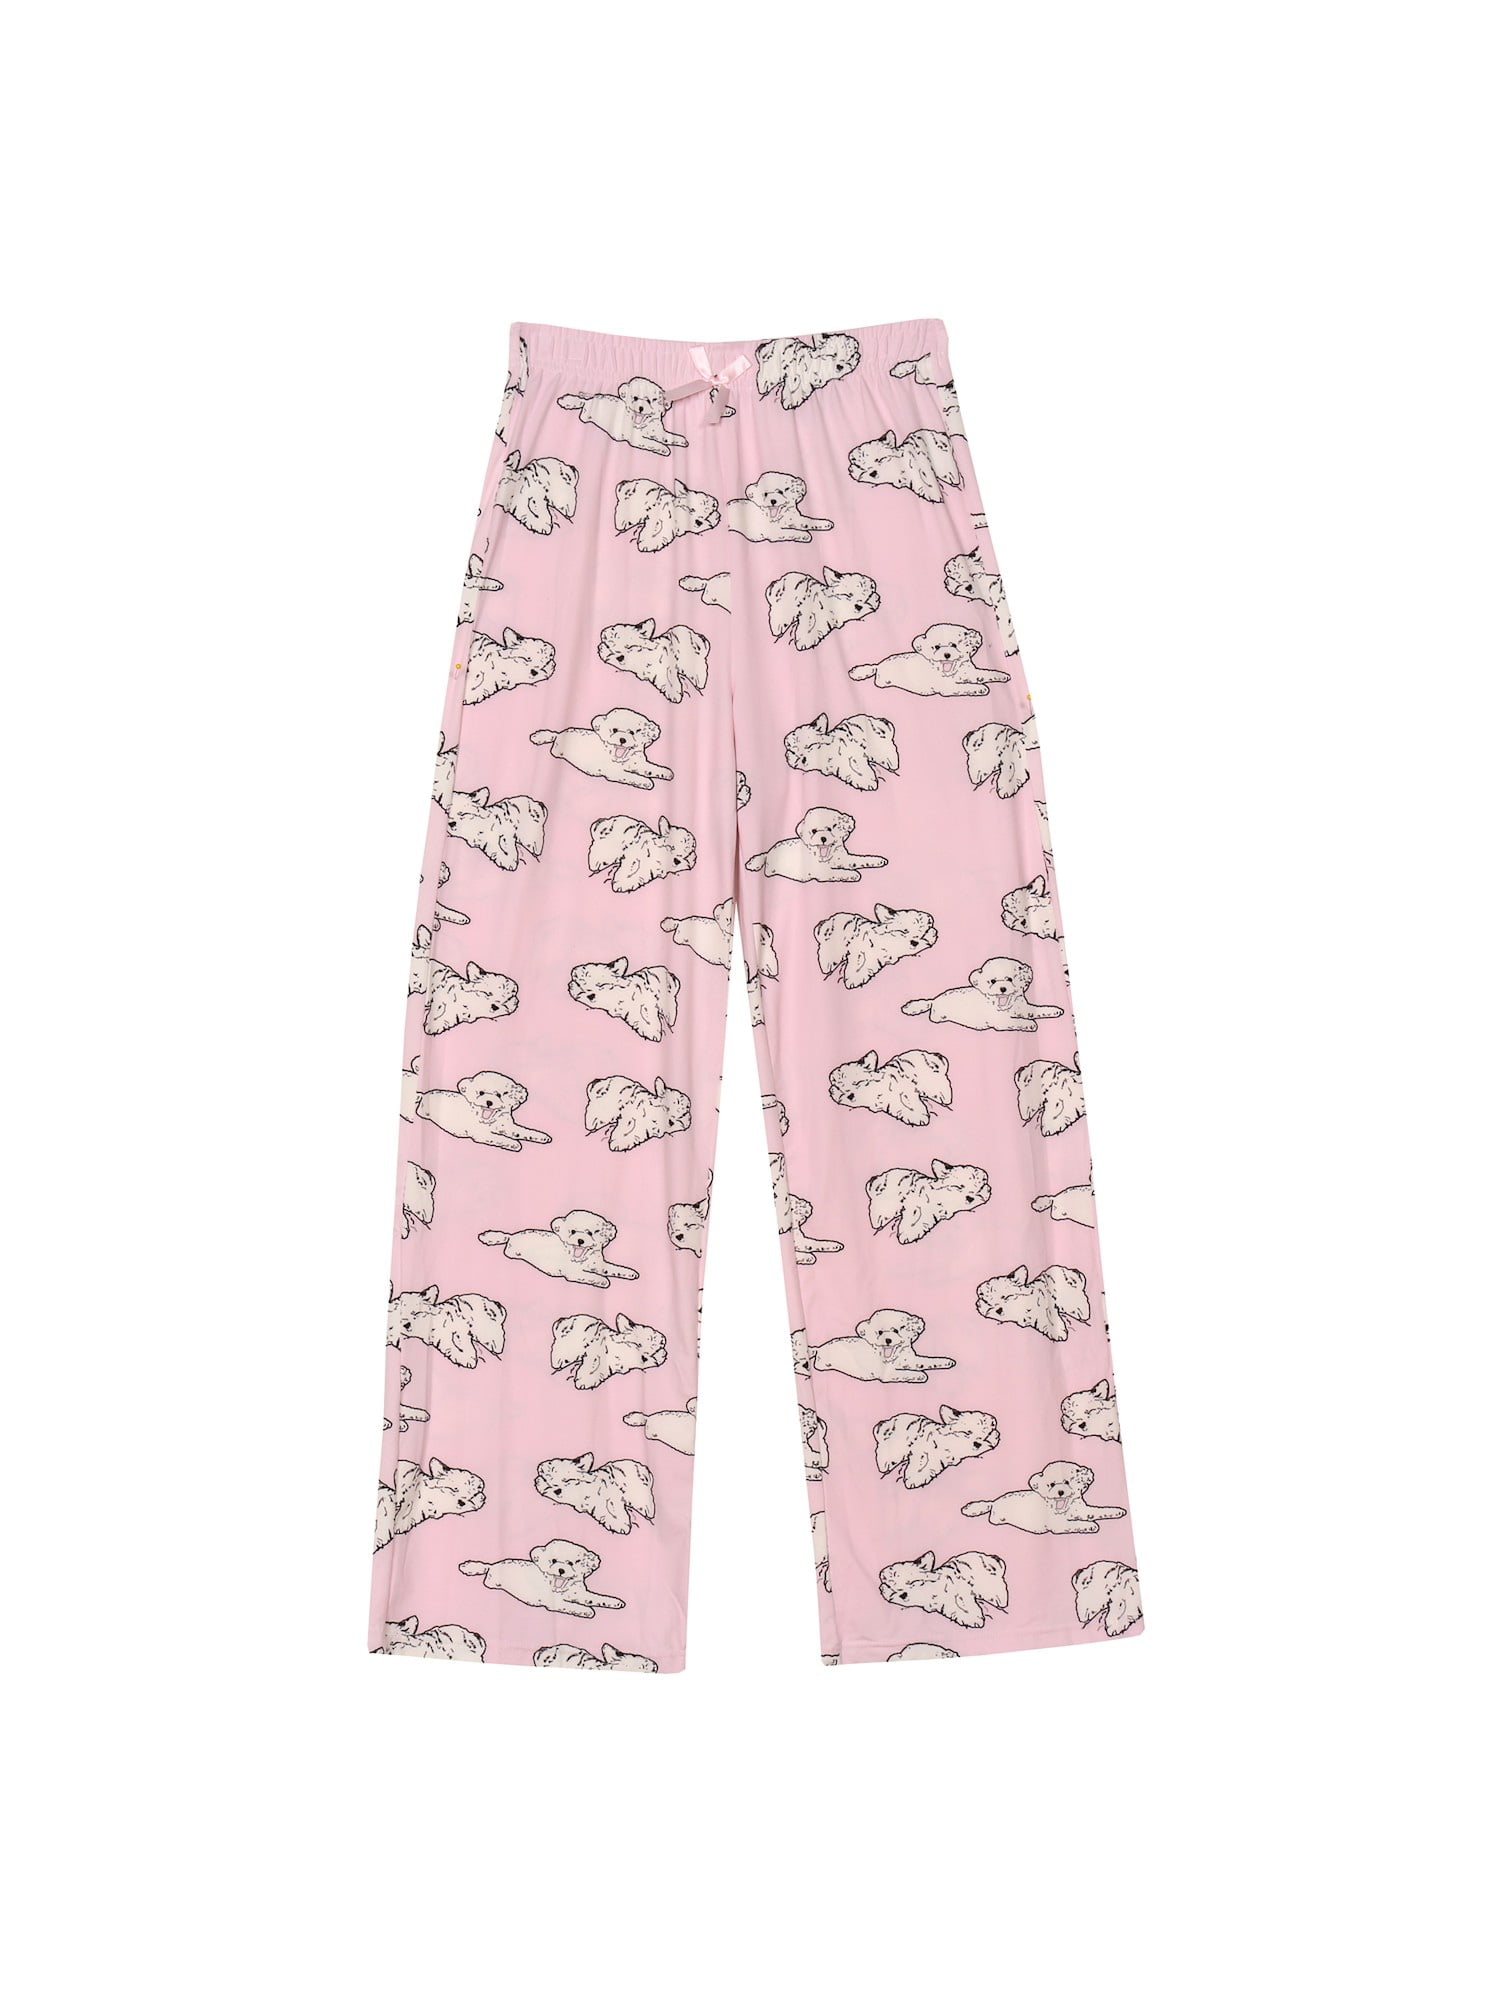 Doggie Pants Pink and White cotton pants